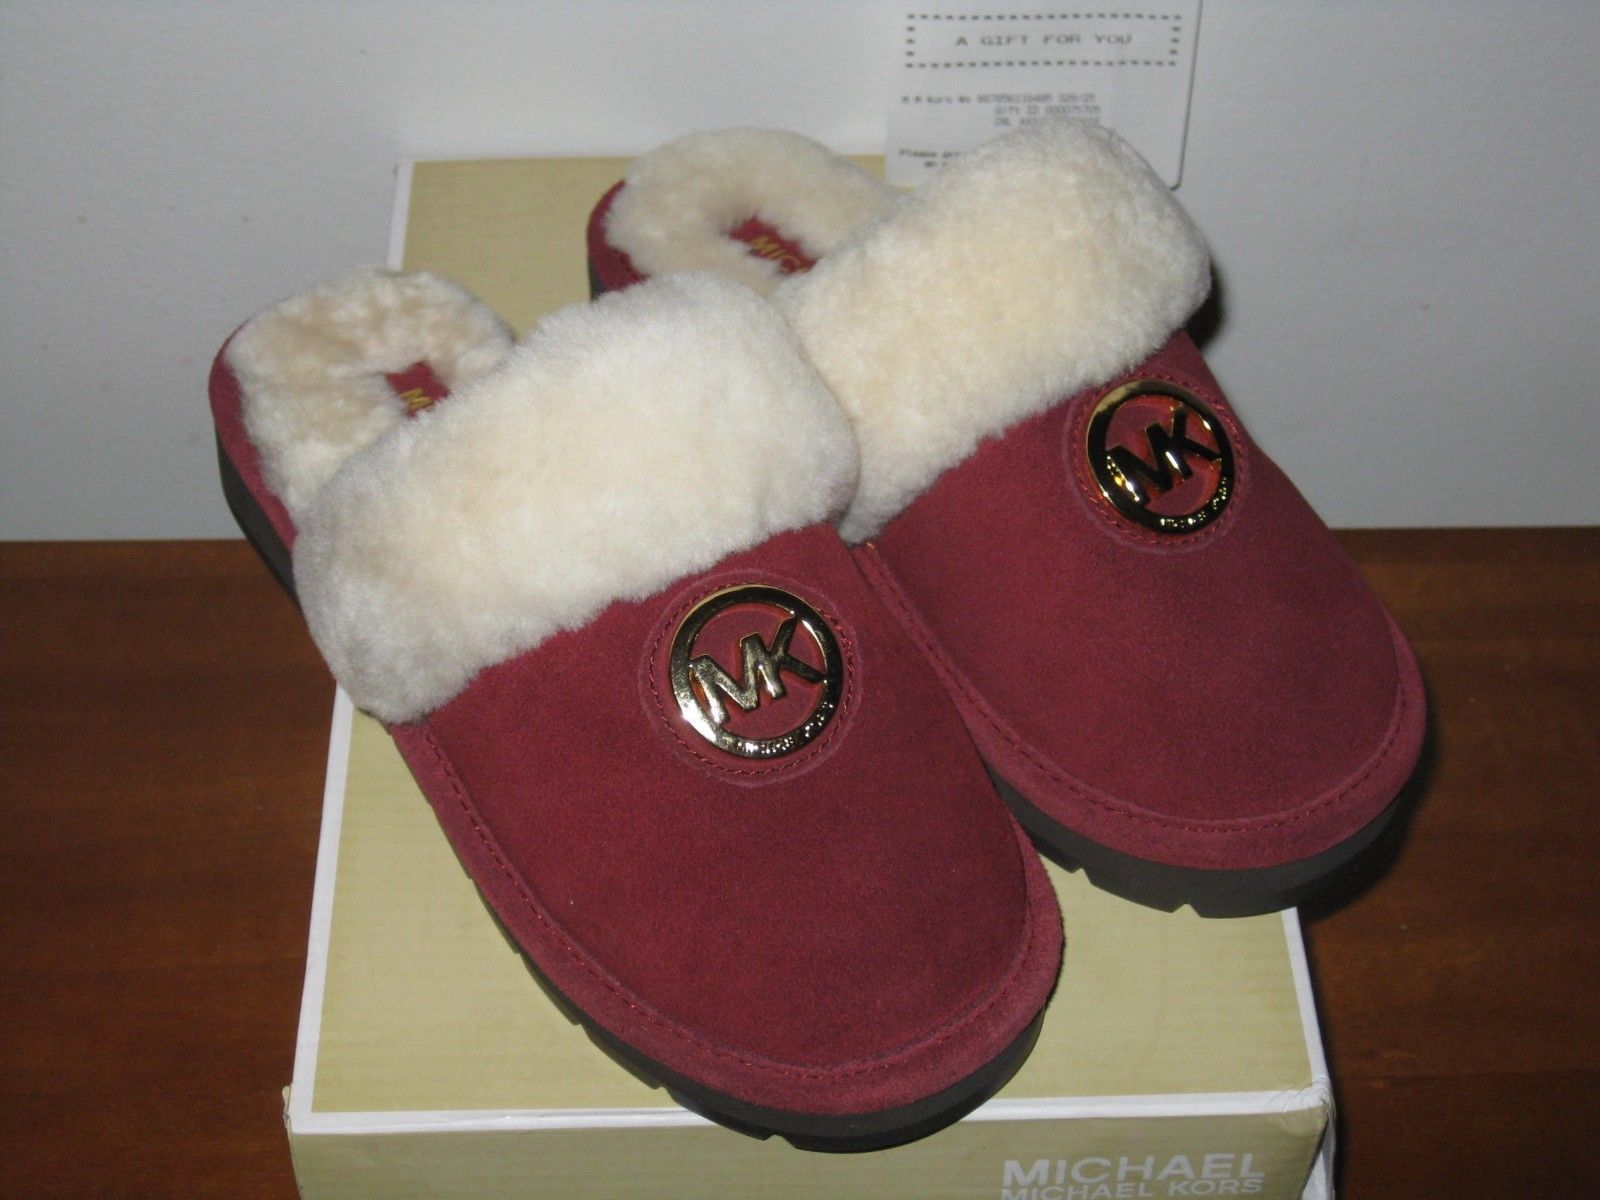 NEW Michael Kors  GENUINE Suede Slippers Clogs w/ SHEEP SKIN Fur & Lined SIZE 11 - $115.00